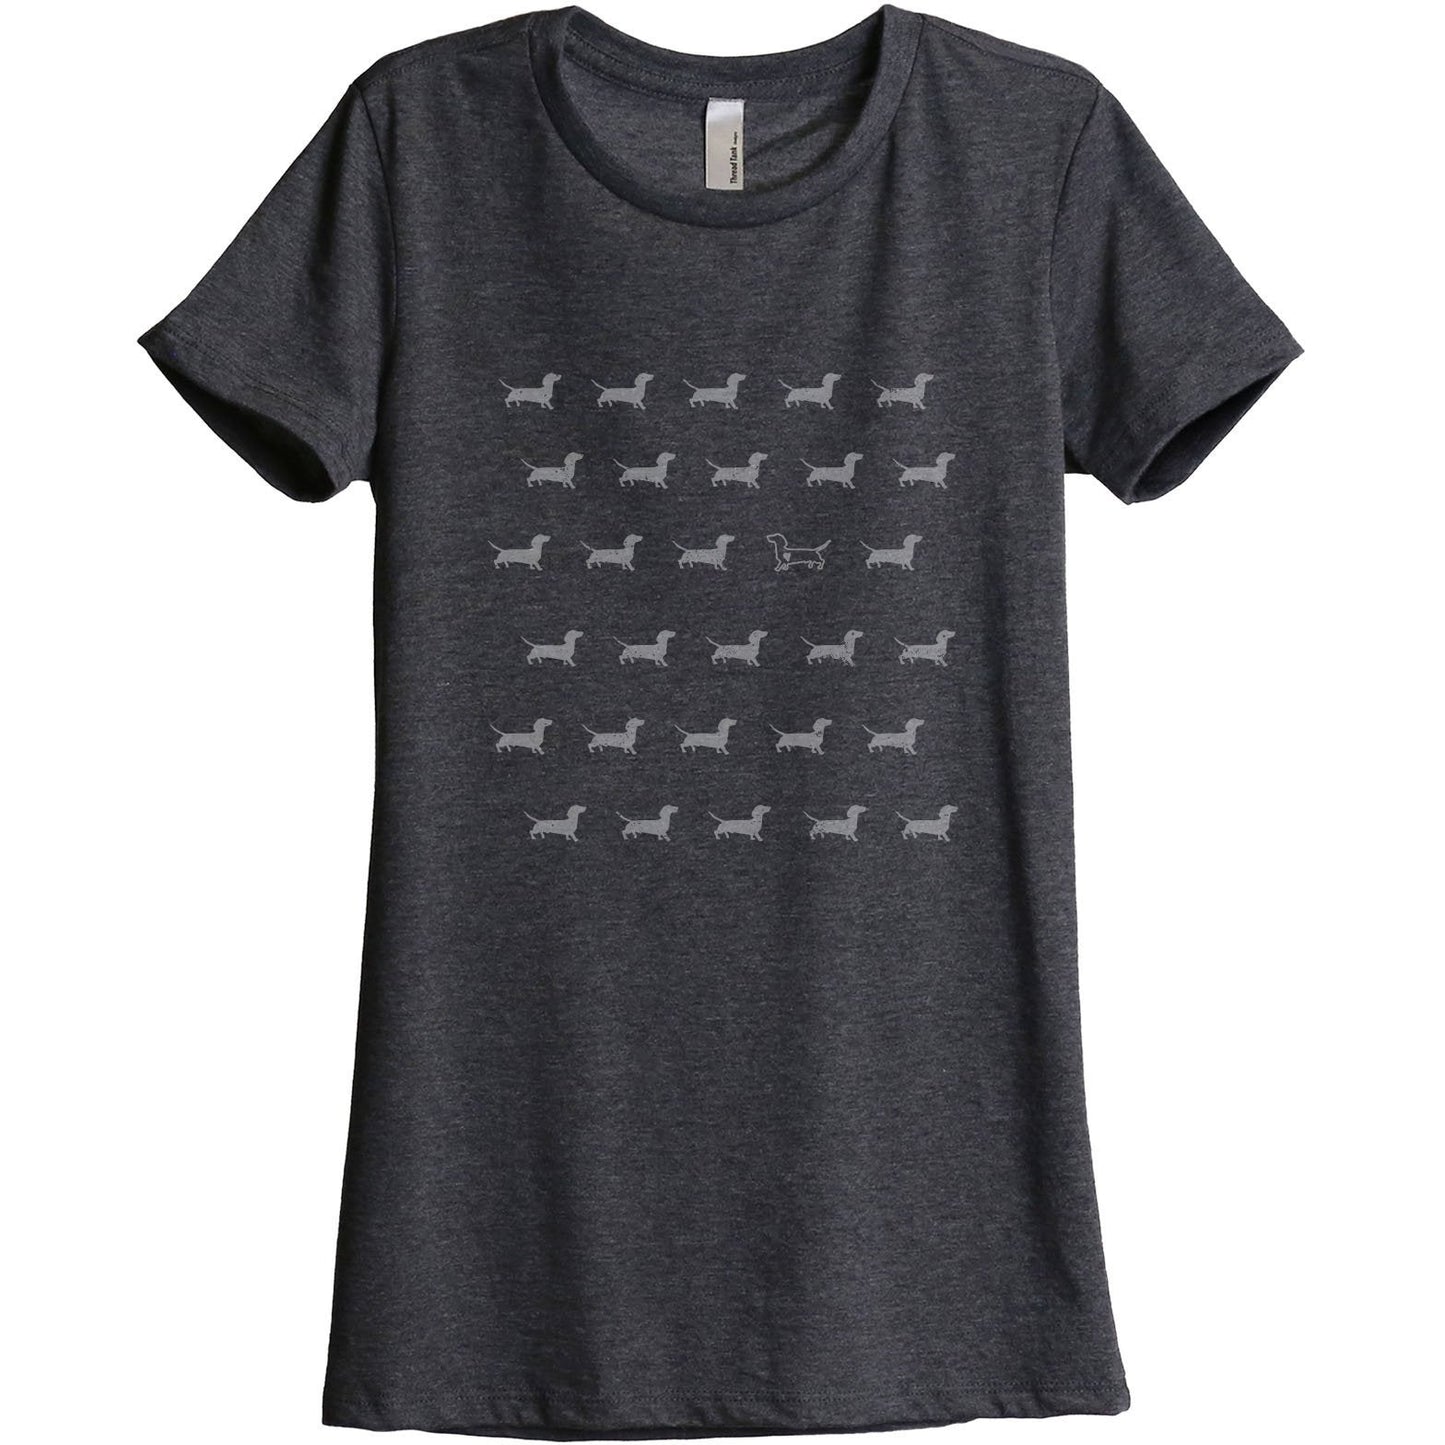 Dachshund Stand Out Women's Relaxed Crewneck T-Shirt Top Tee Charcoal Grey
